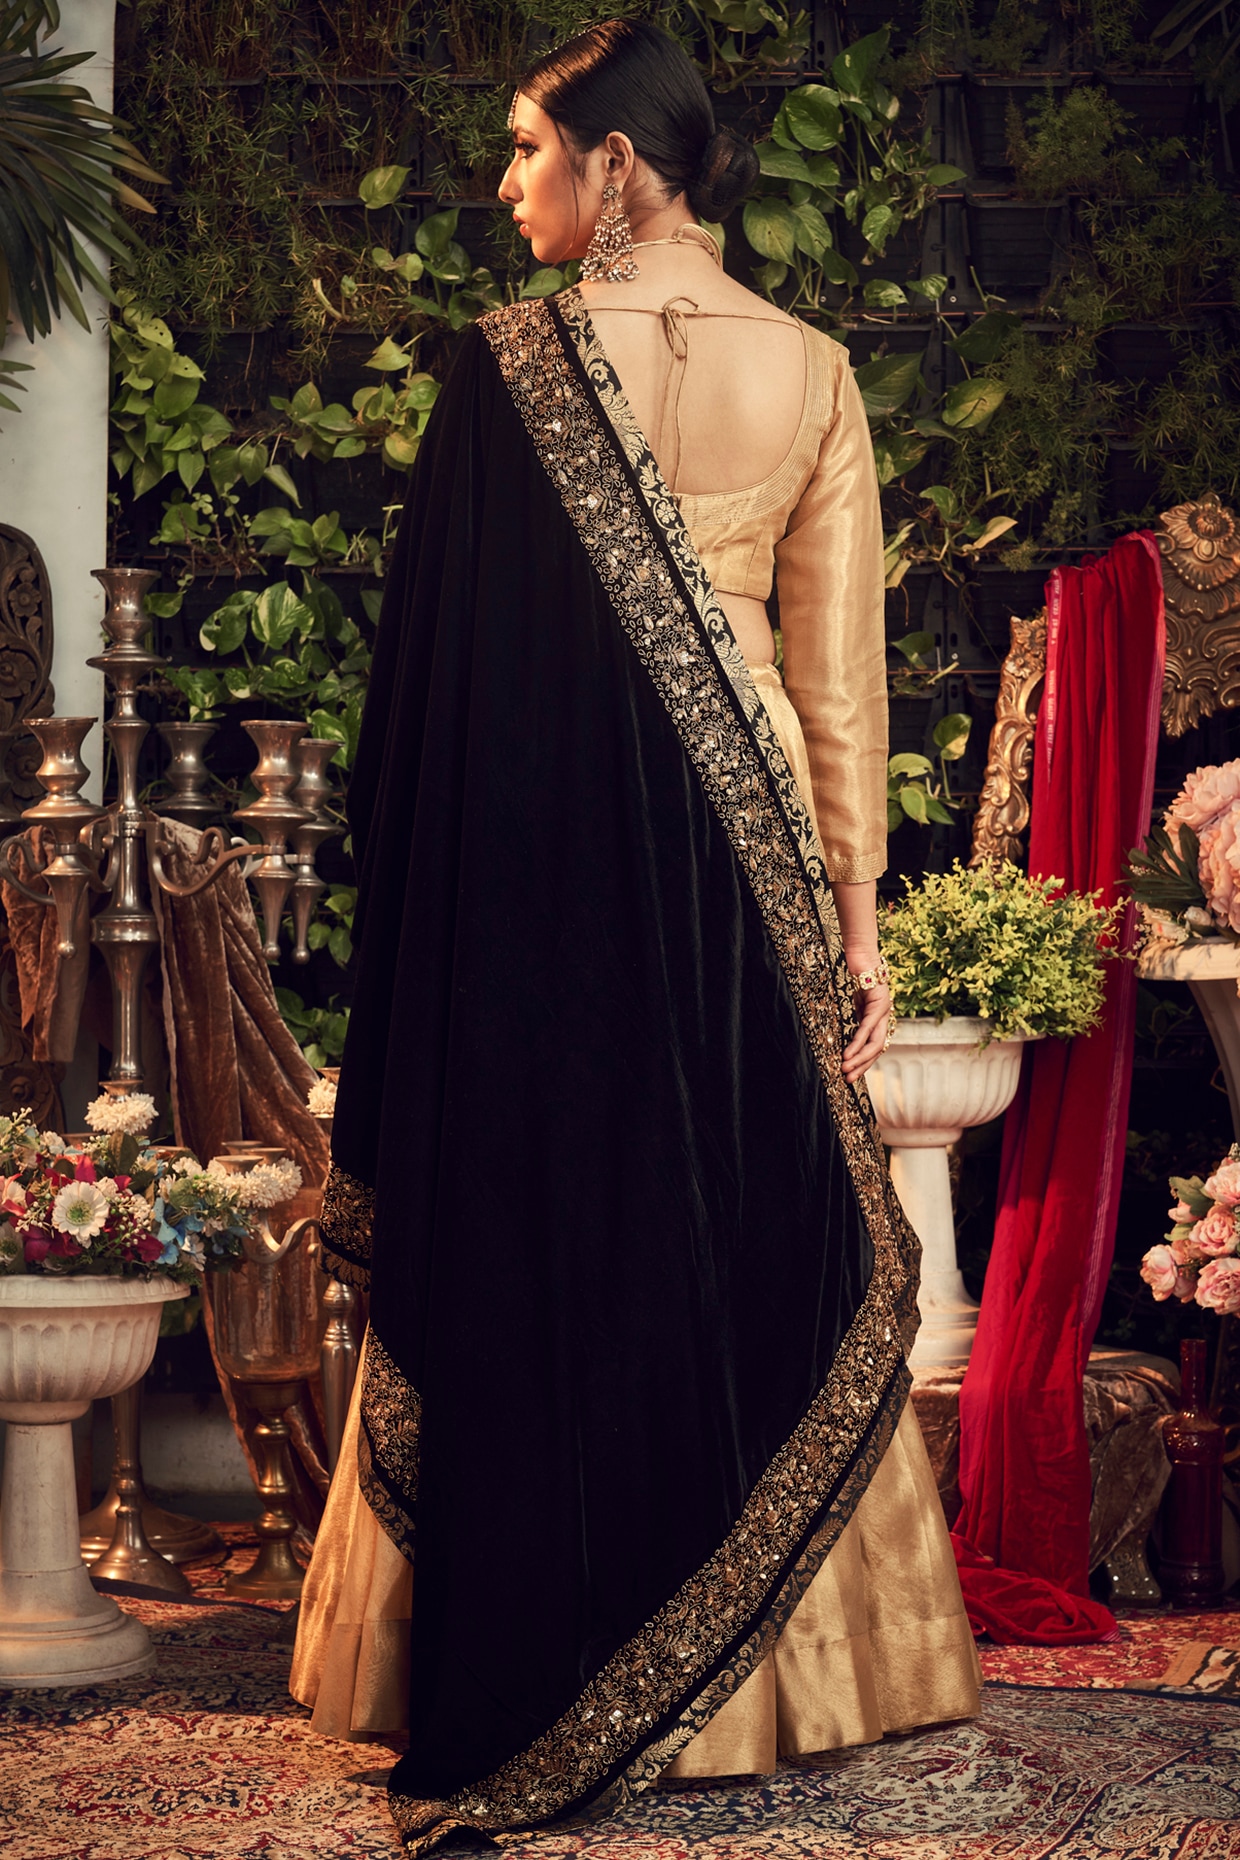 OFM-BIP-001 | Stunning Black and Red Lehenga Cum Dress With … | Flickr